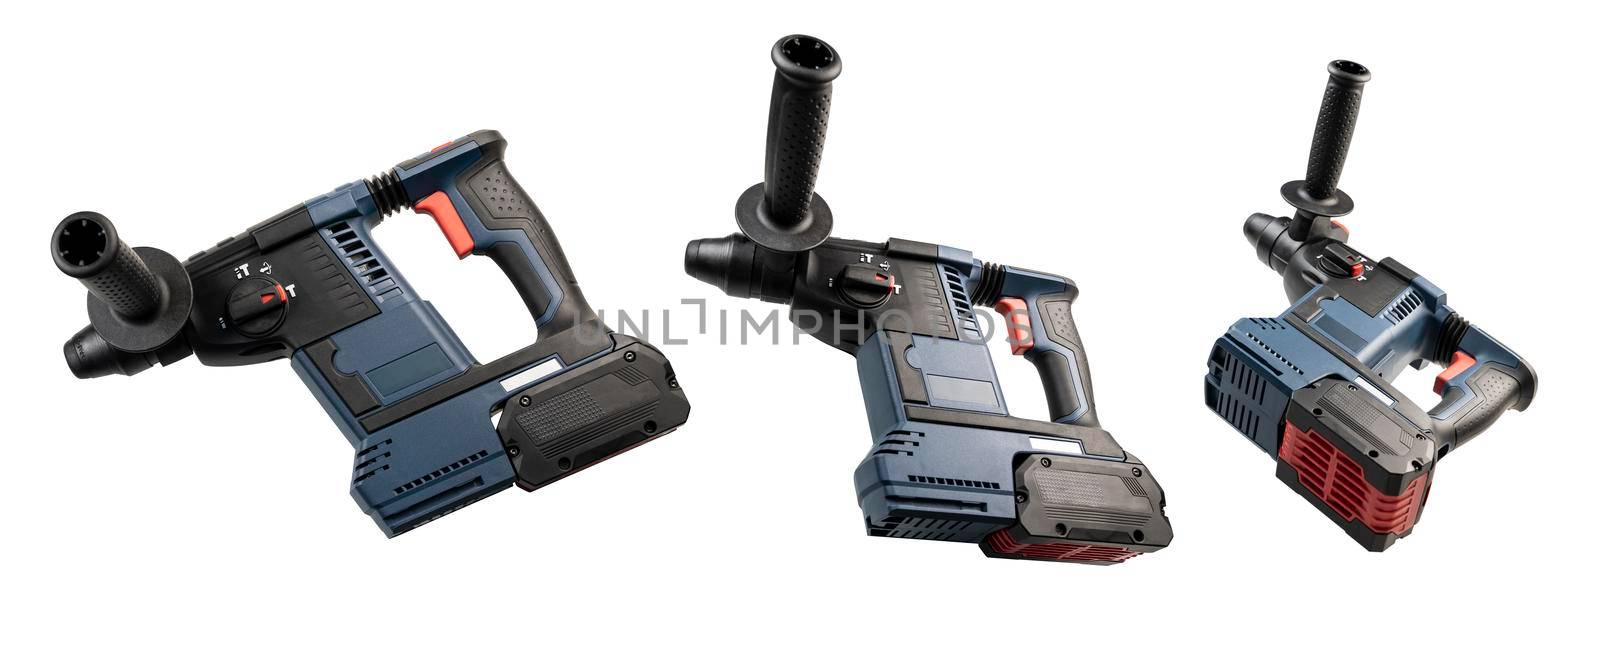 Cordless drill in different angles on a white background.